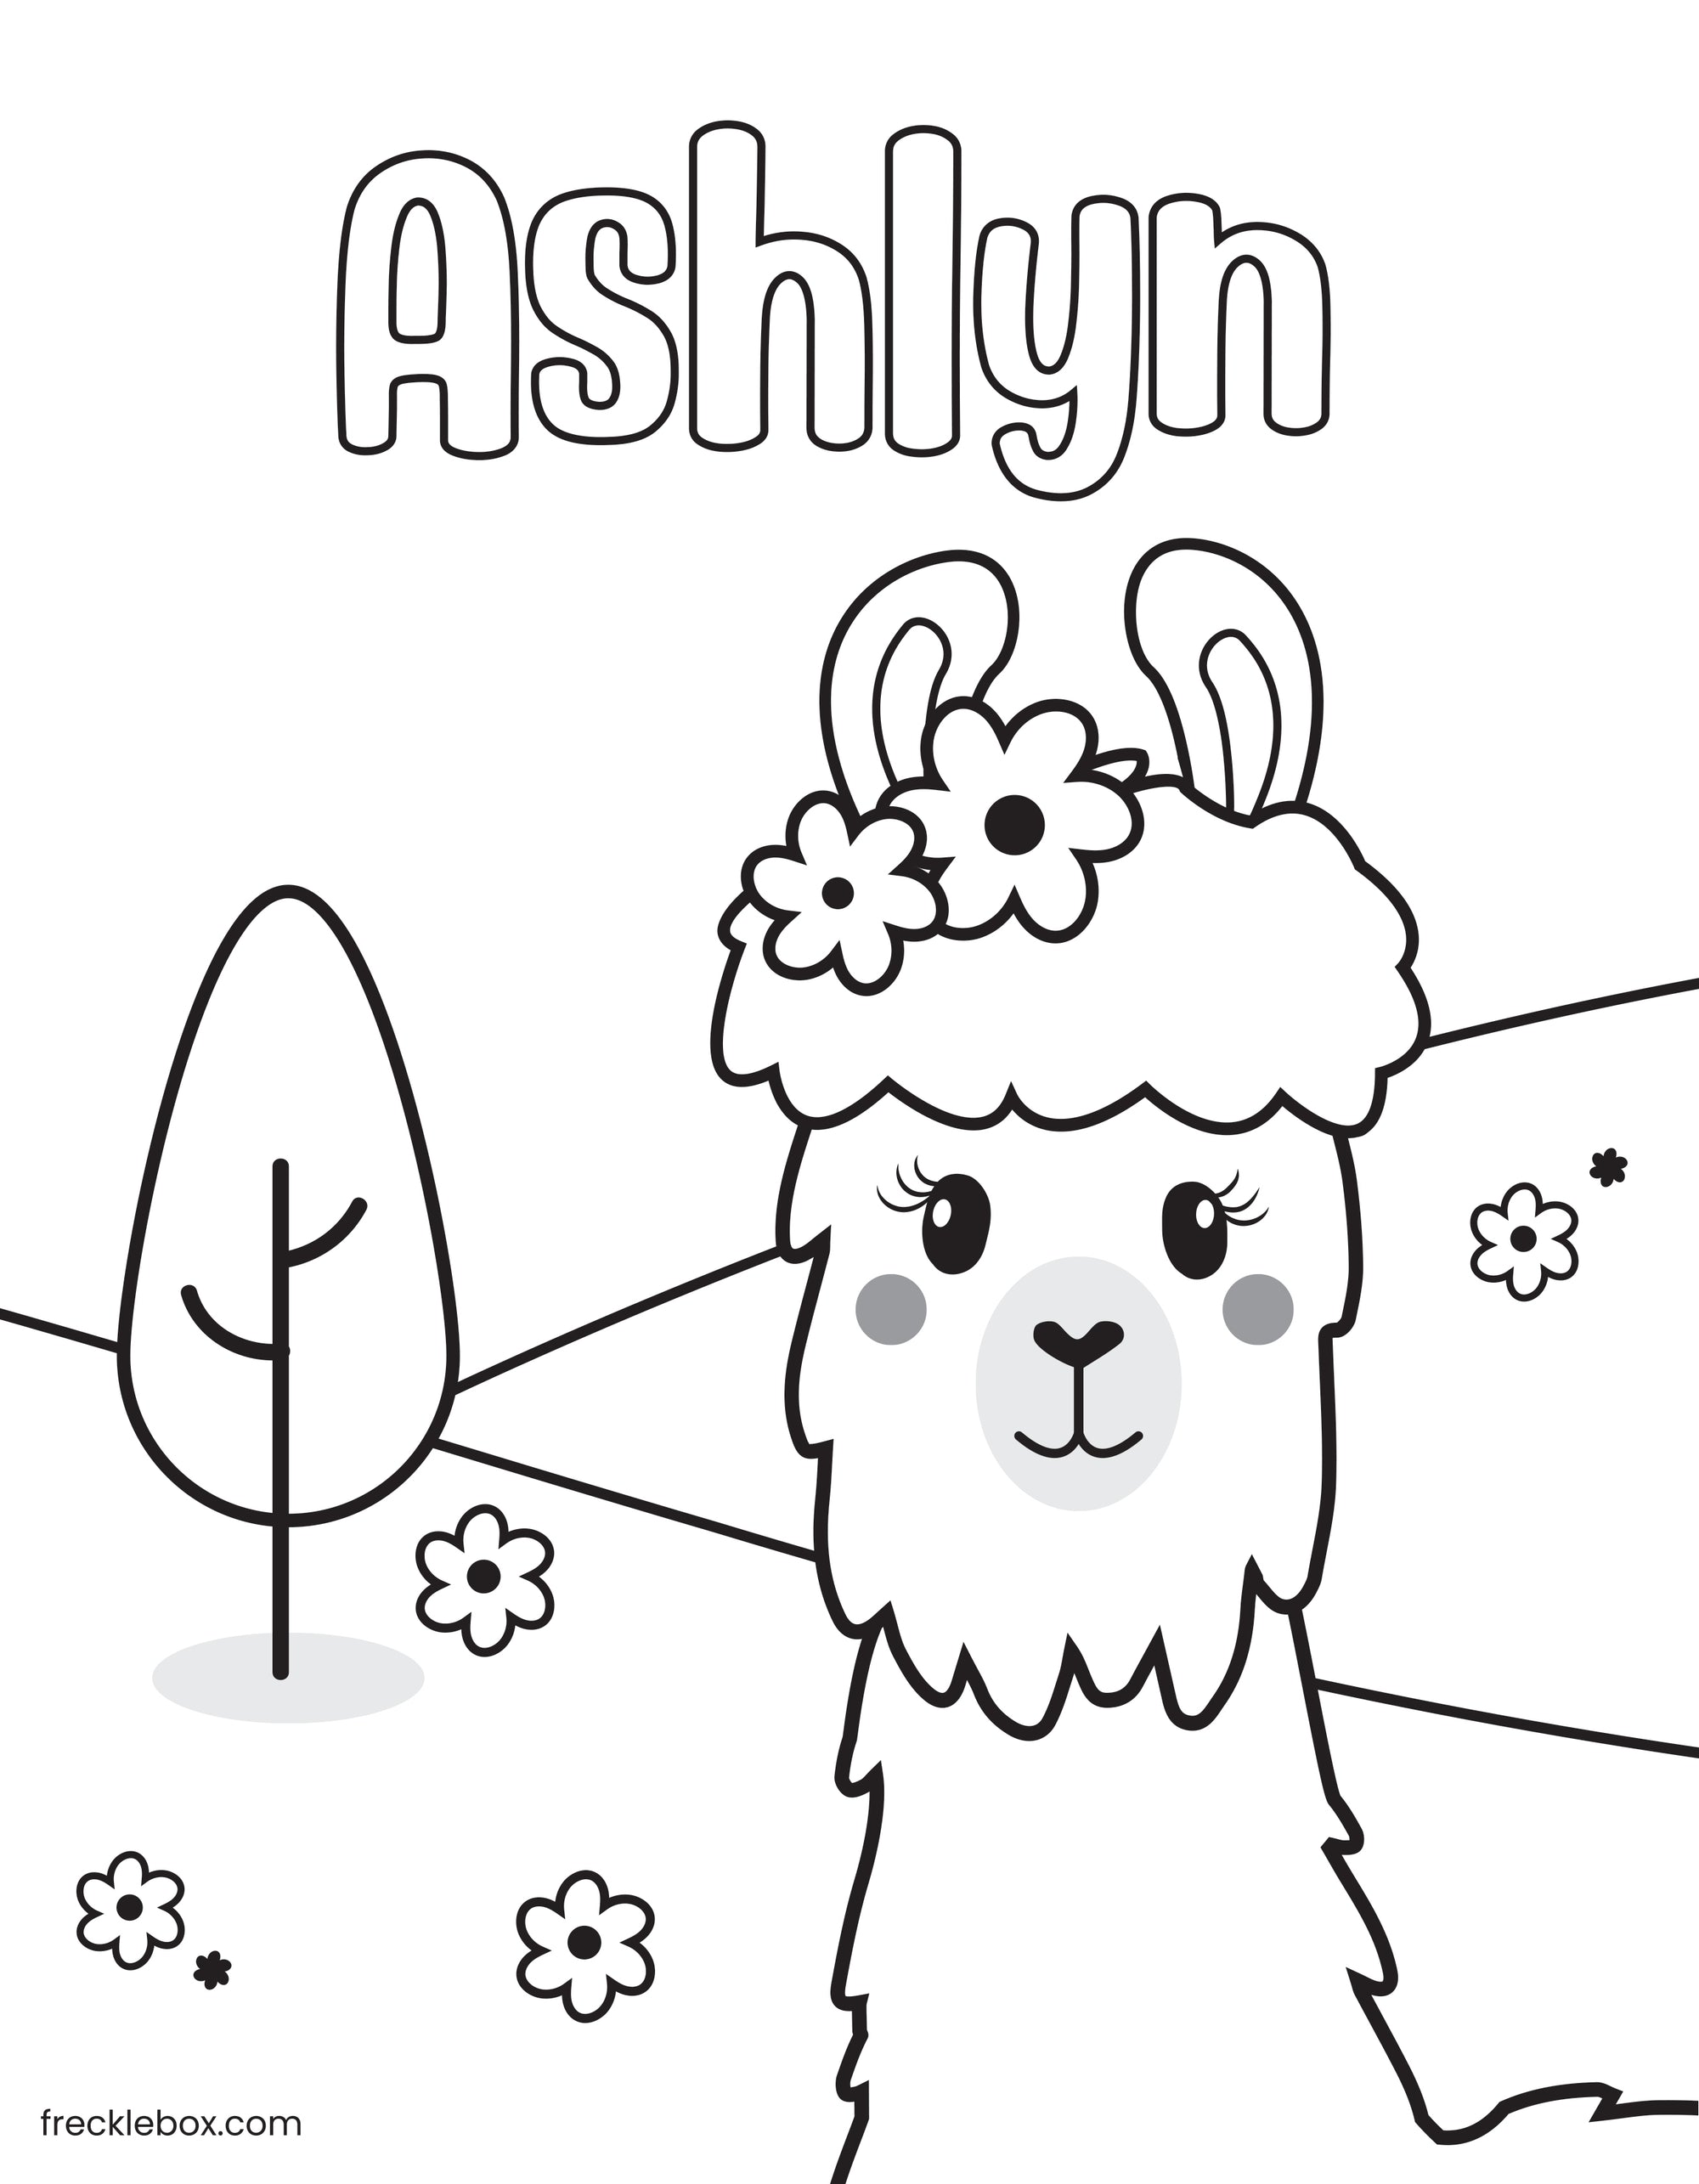 Personalized coloring page with child's name and a llama in a meadow.